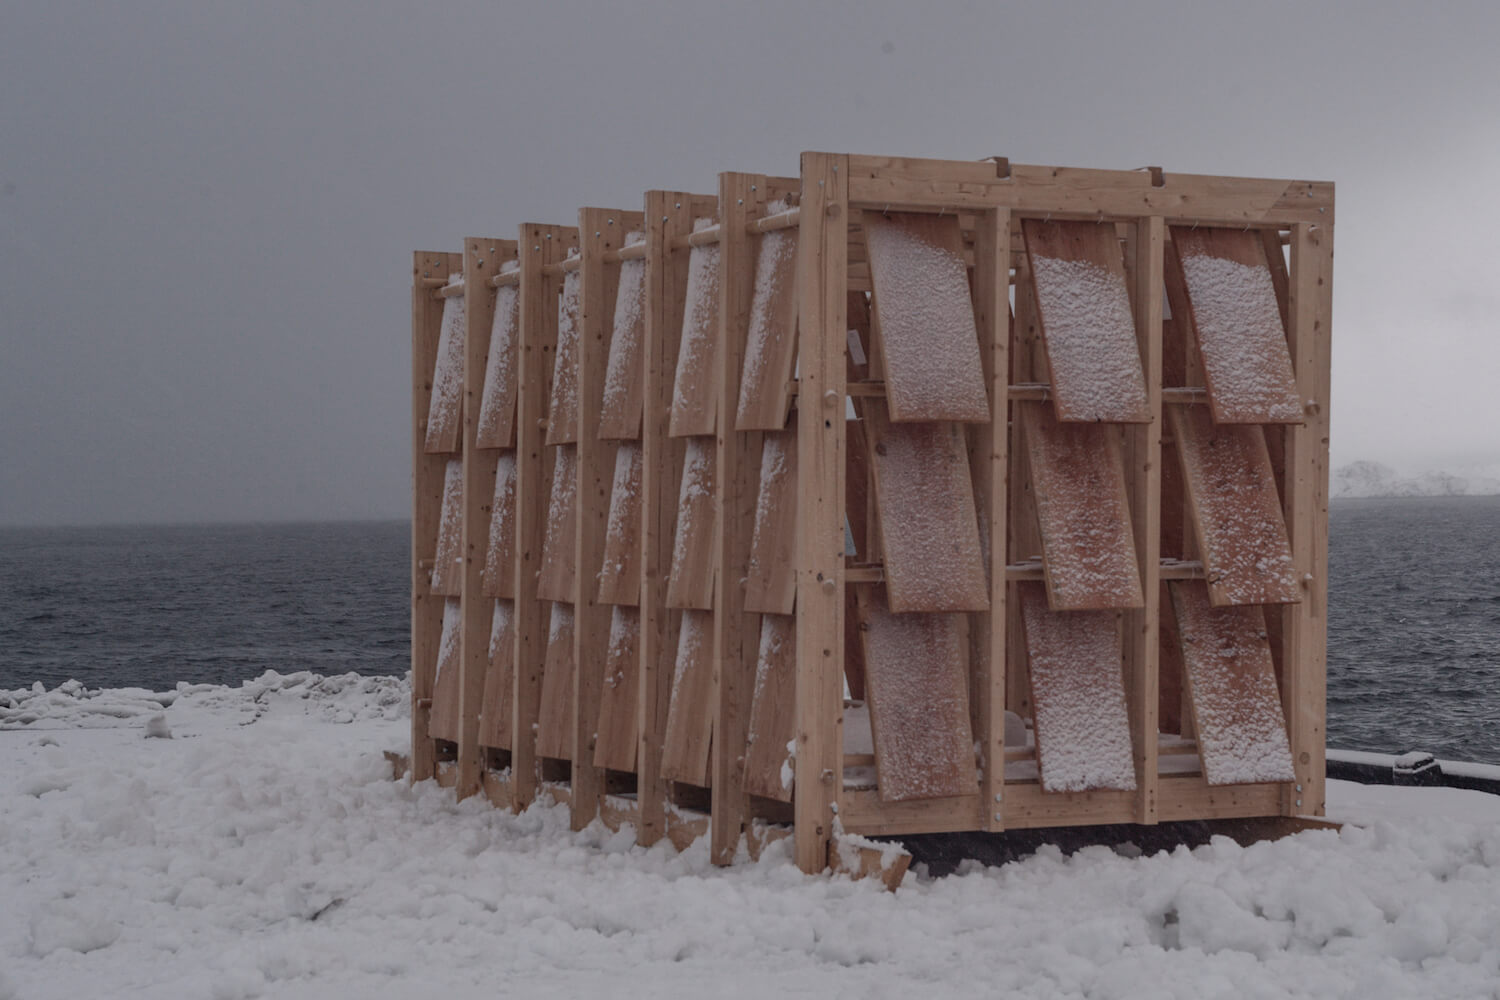 Qamutit Sled House sits near the harbor, covered with a dusting of snow in Nuuk, Greenland.